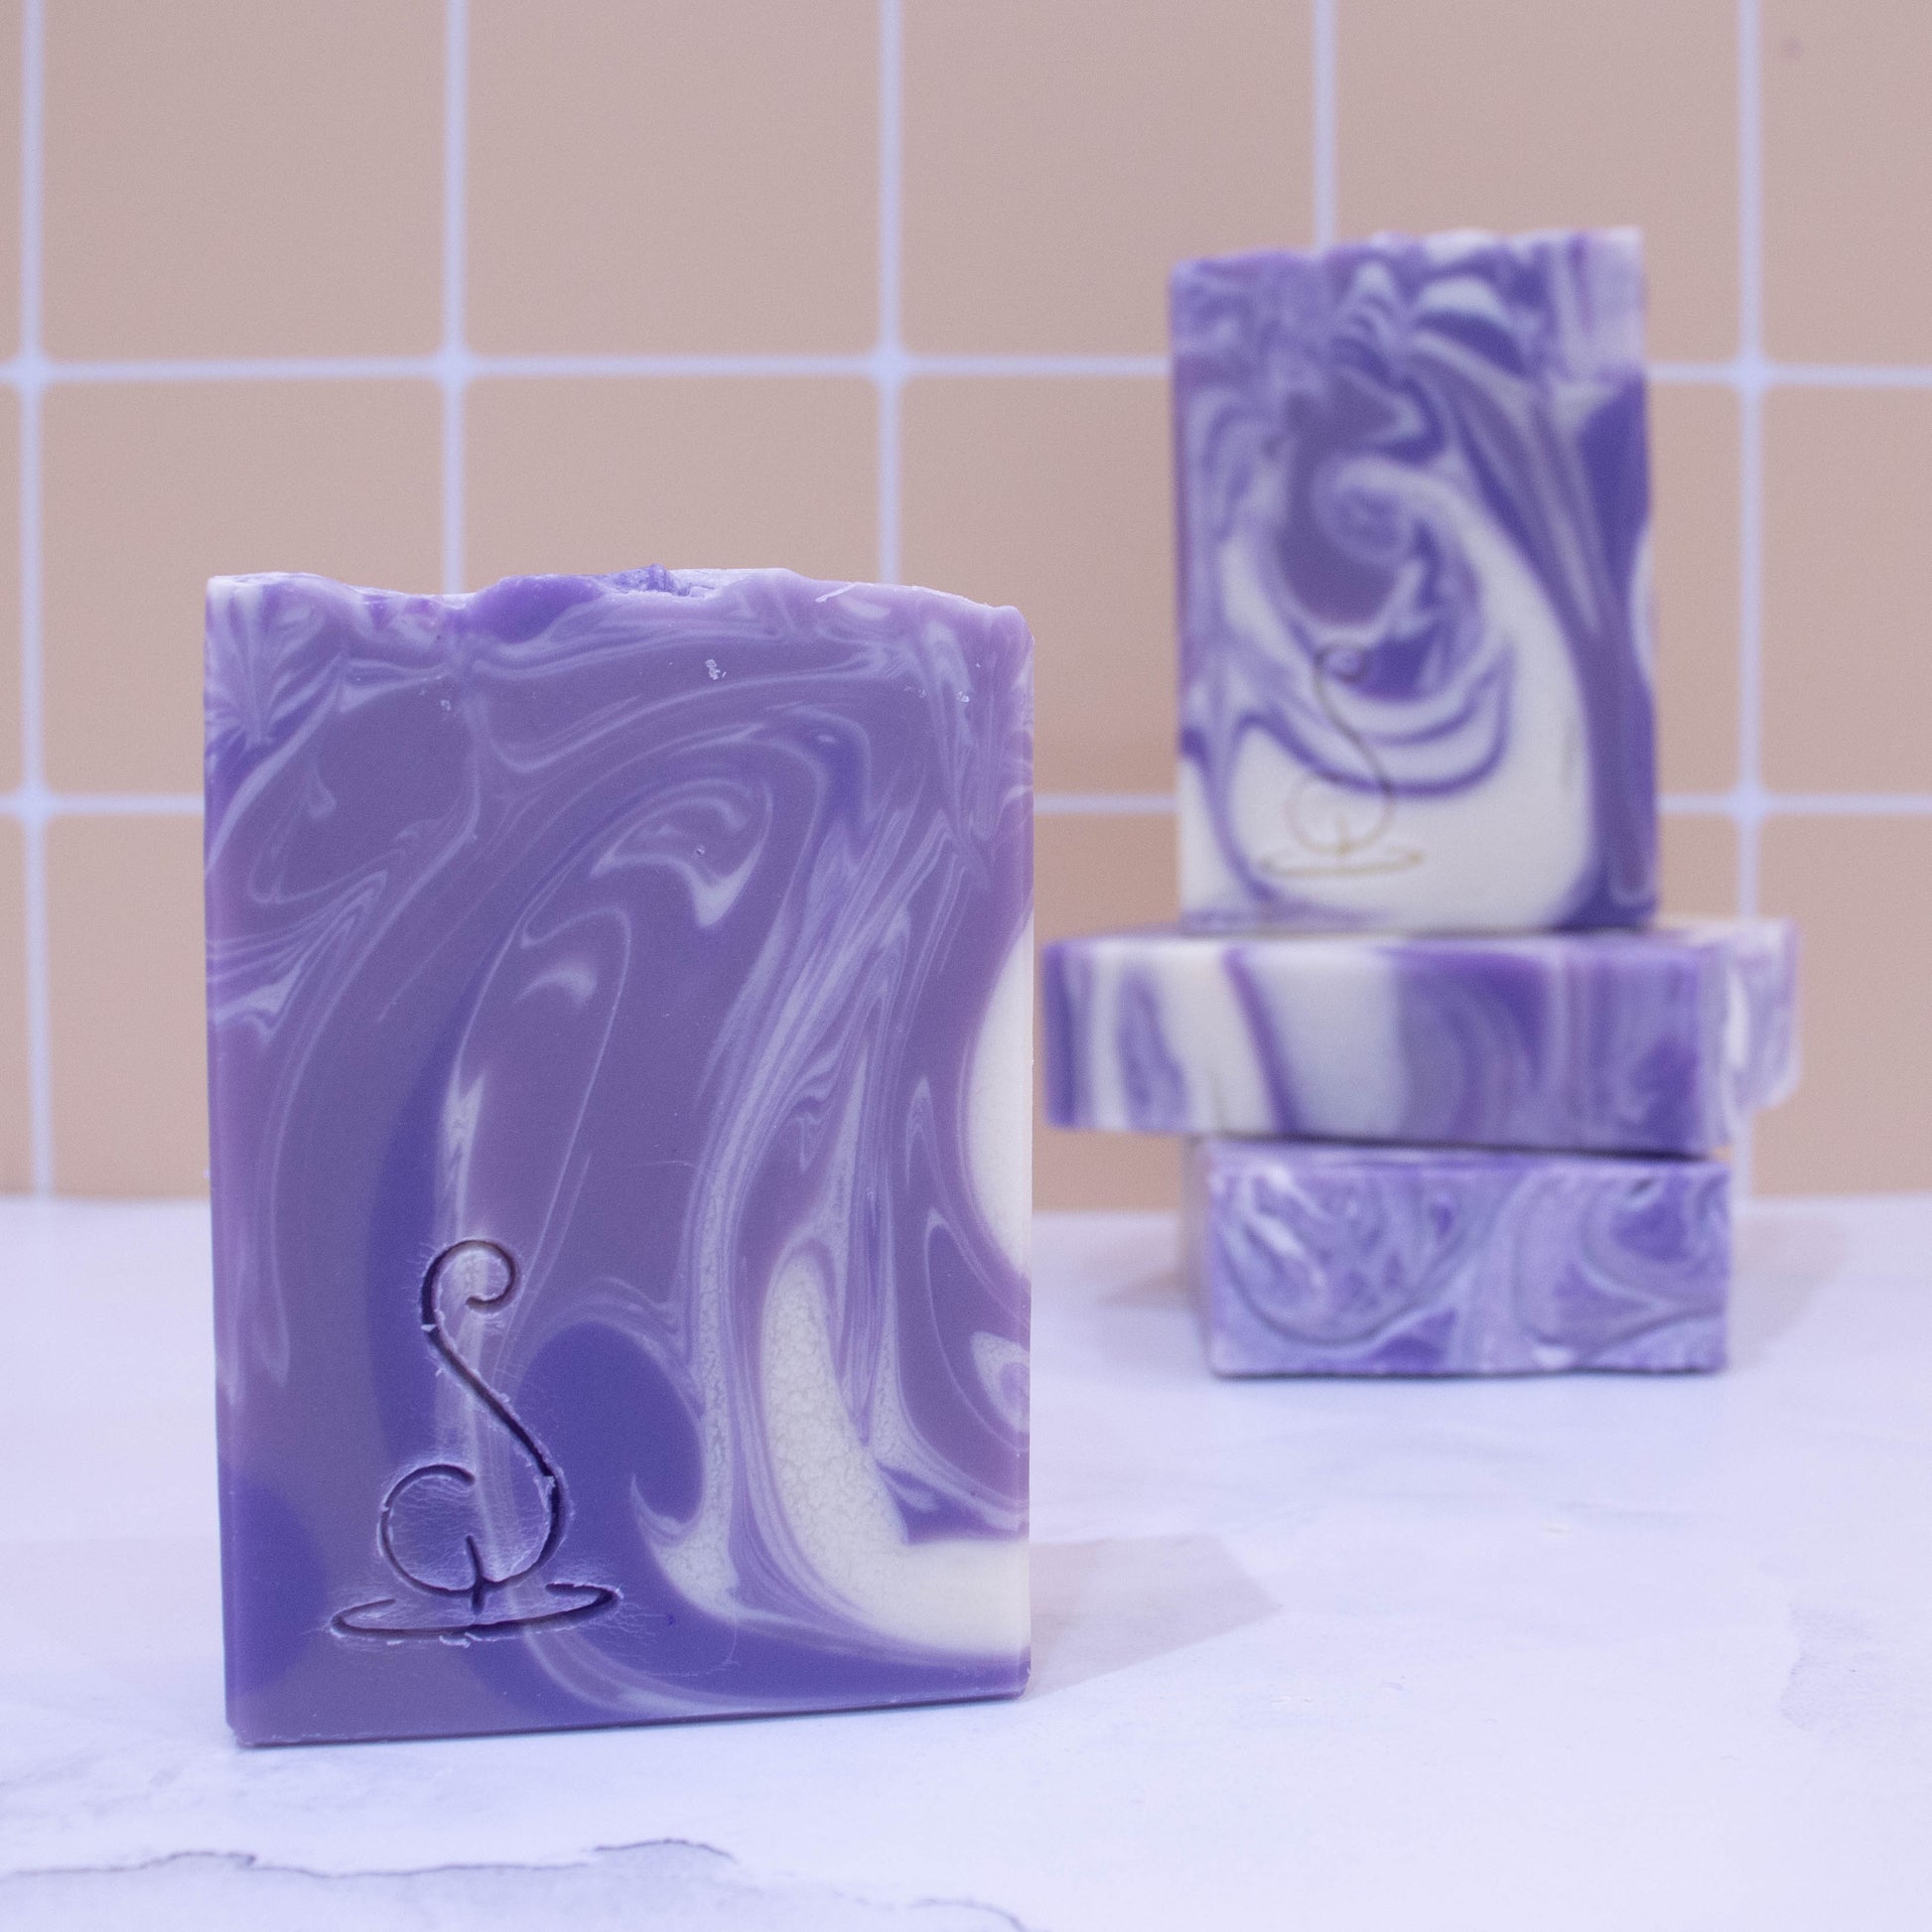 Four rectangular bars of soap sit on a marble bench each showing various design patterns from the same batch of soap.  All soaps feature a swirling pattern of white, lavender and dark purple soap but all have slight differences